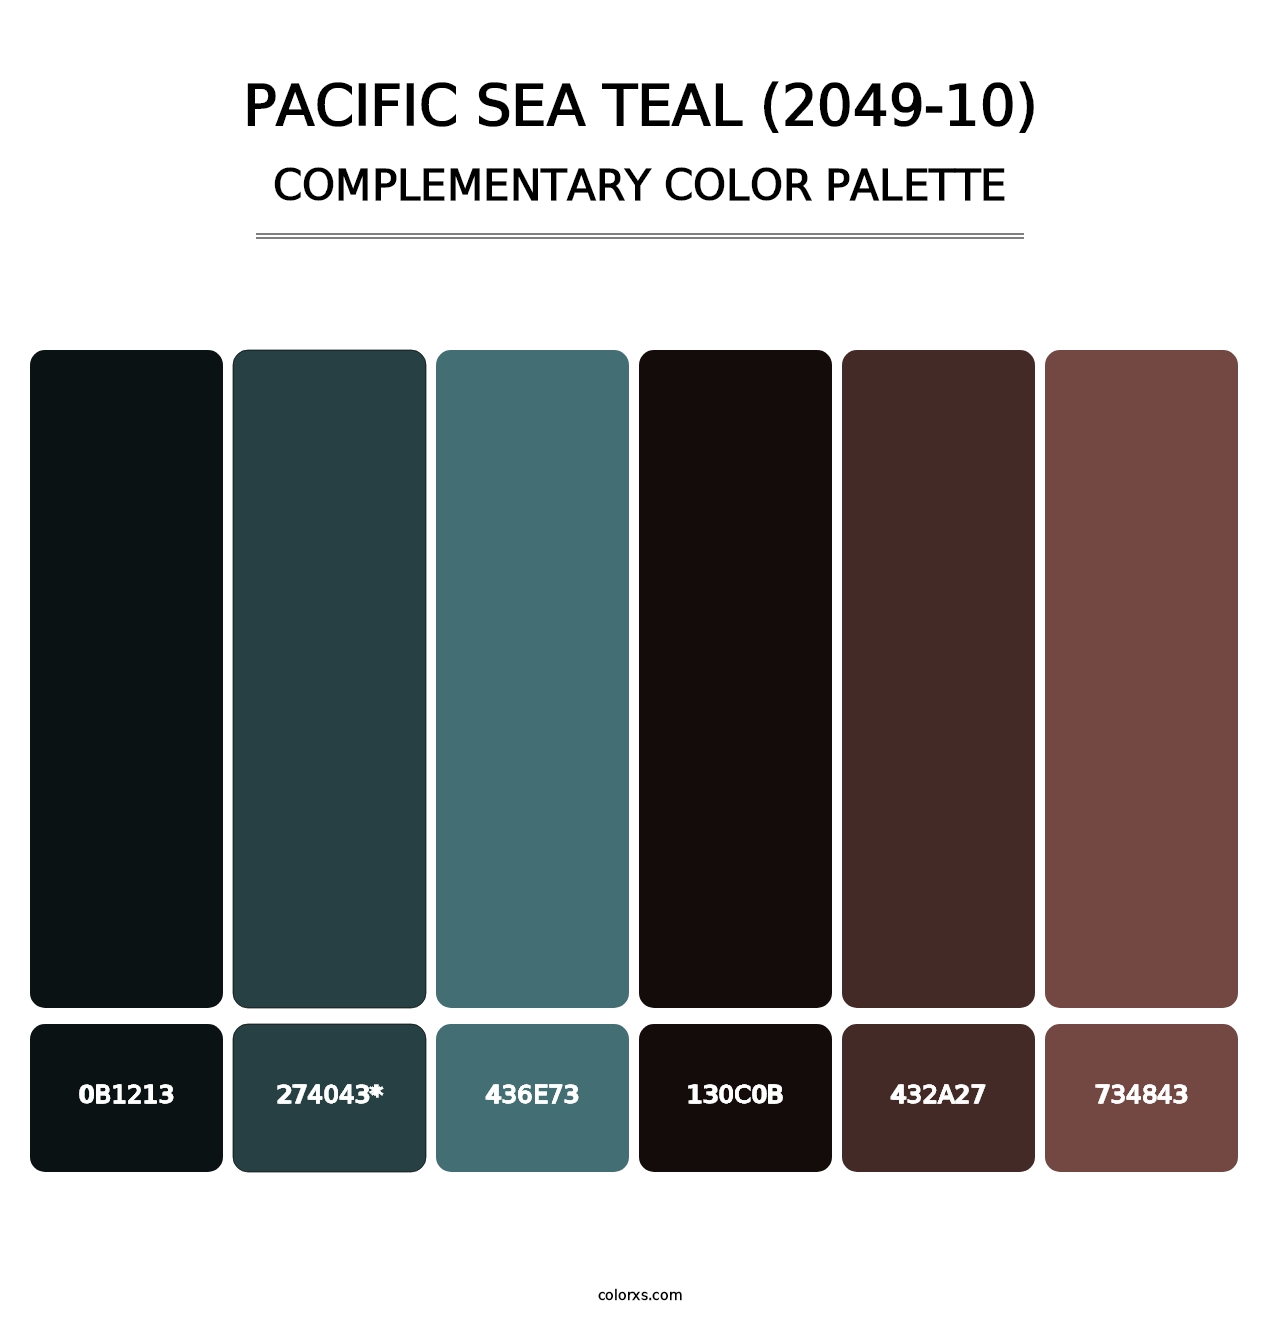 Pacific Sea Teal (2049-10) - Complementary Color Palette